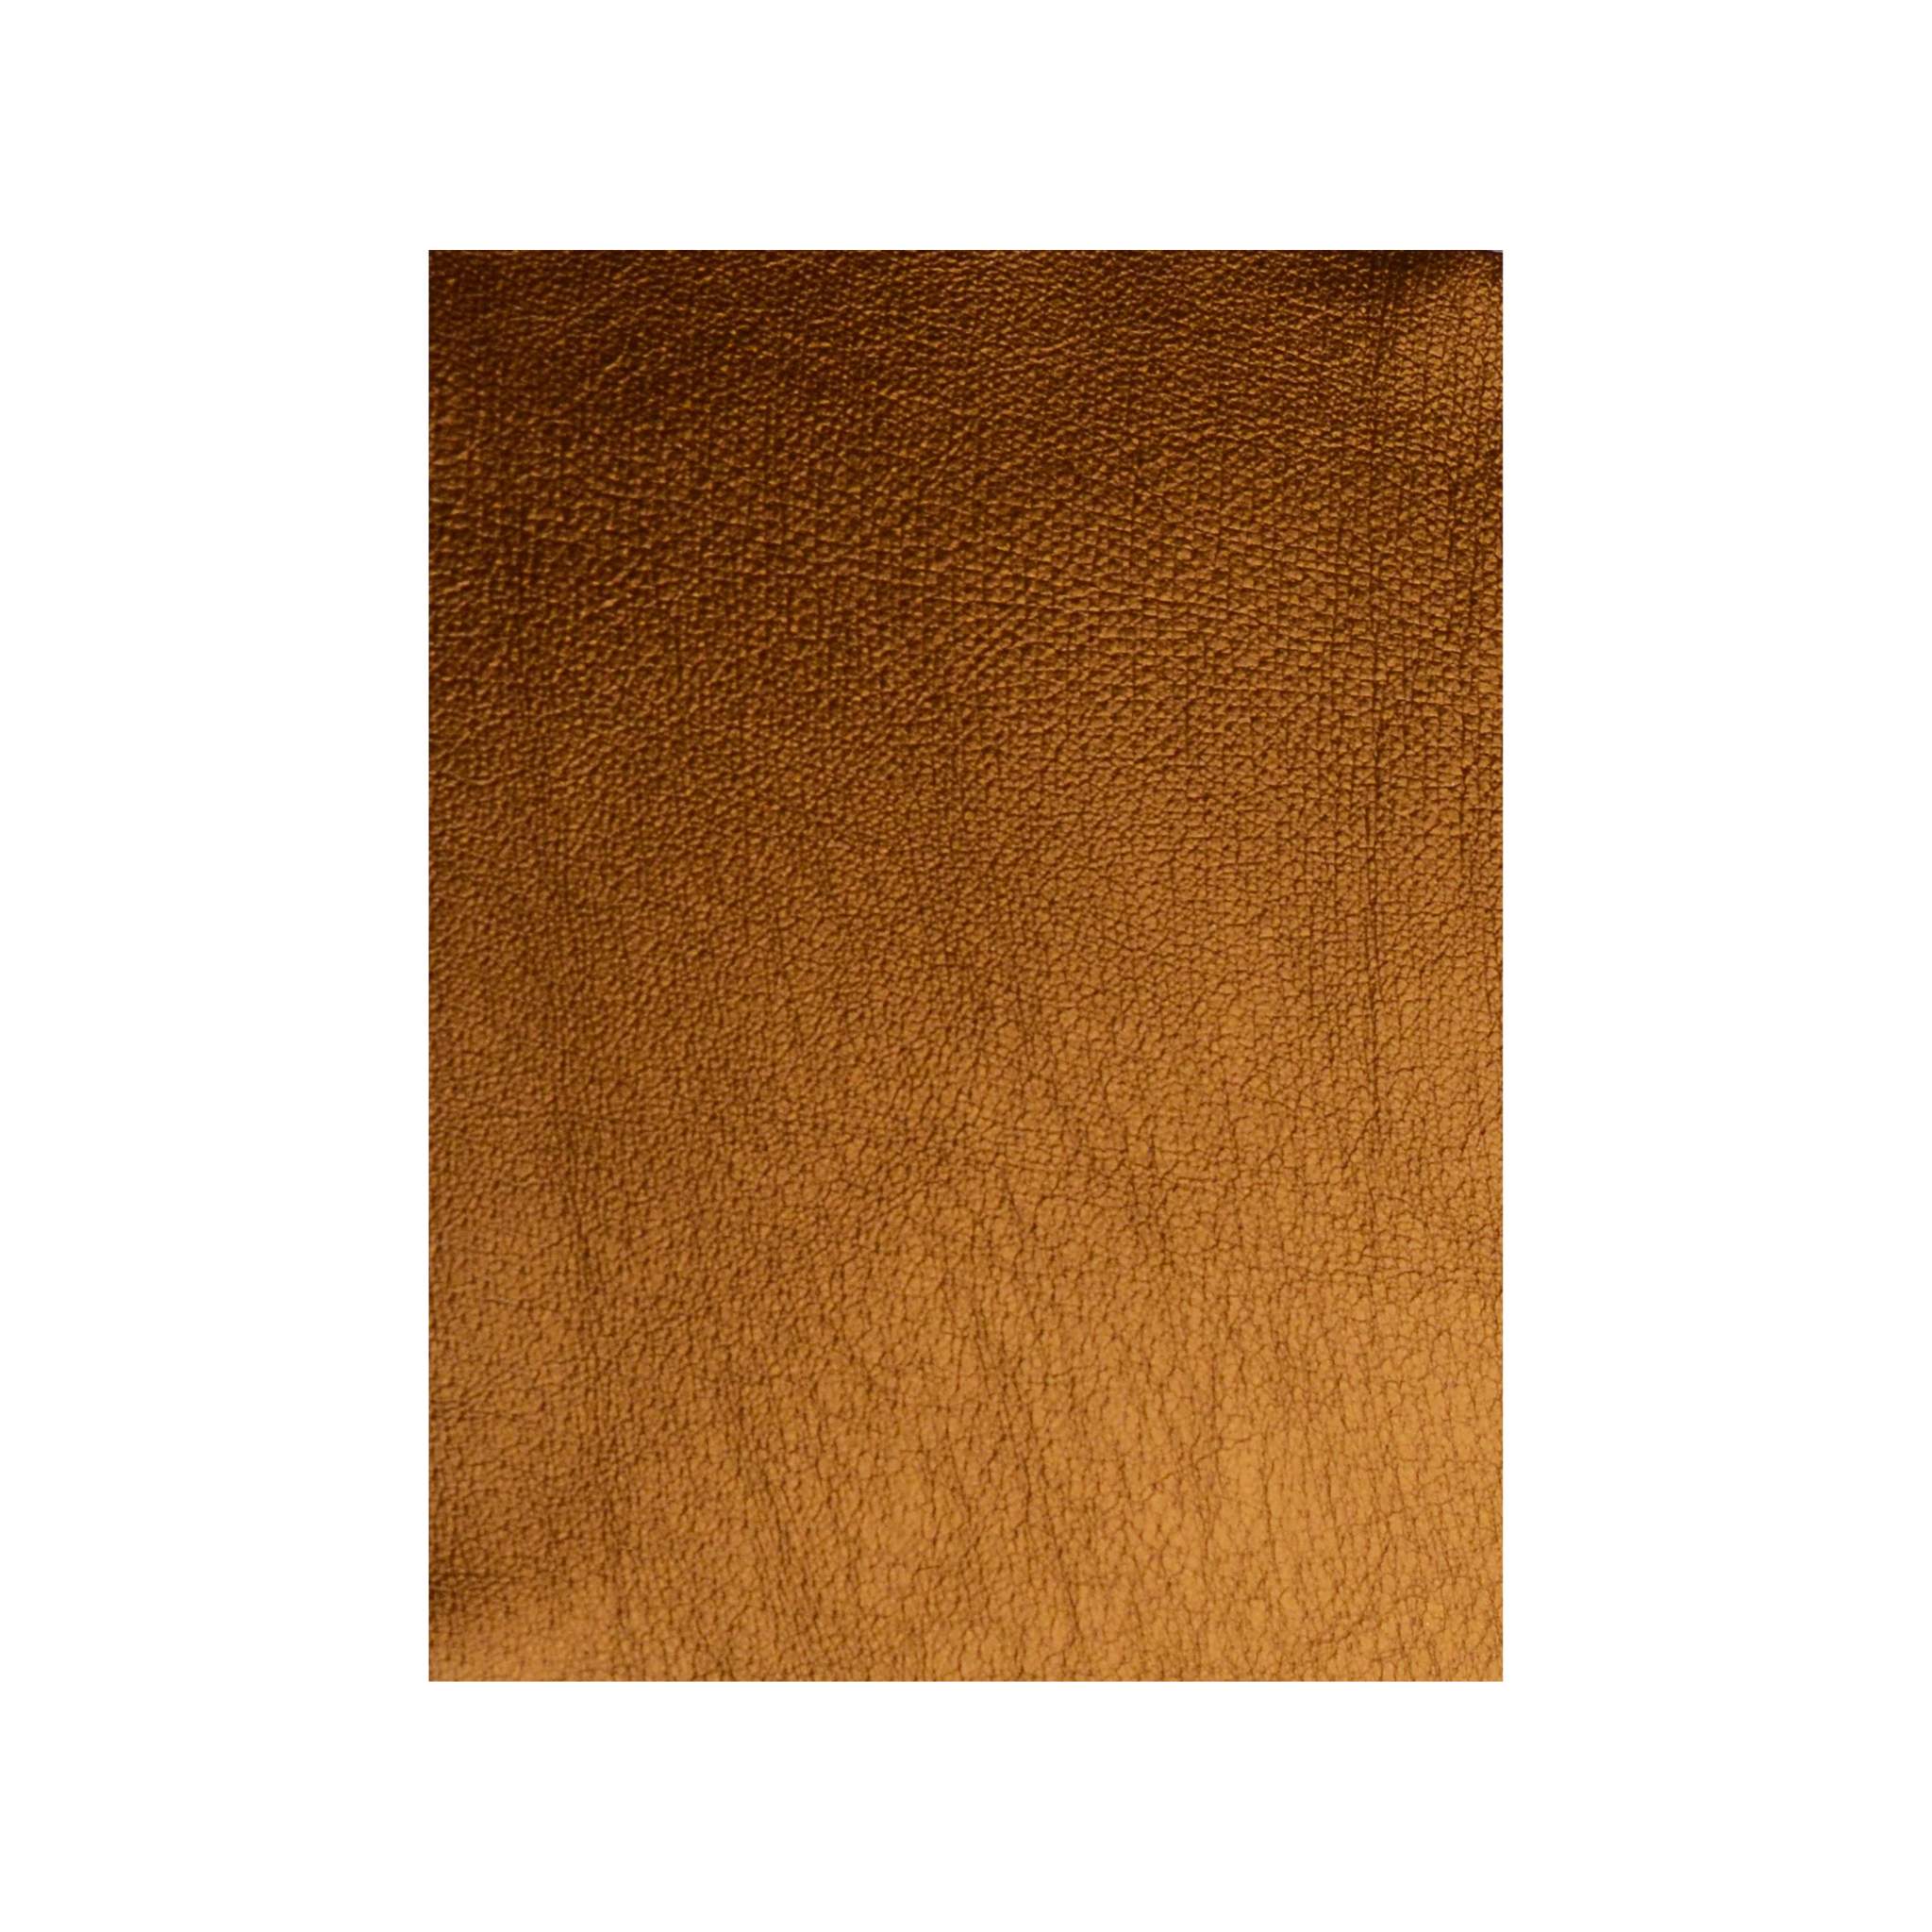 Copper Metallic leather of exceptional quality that is suitable for hand or machine stitching.